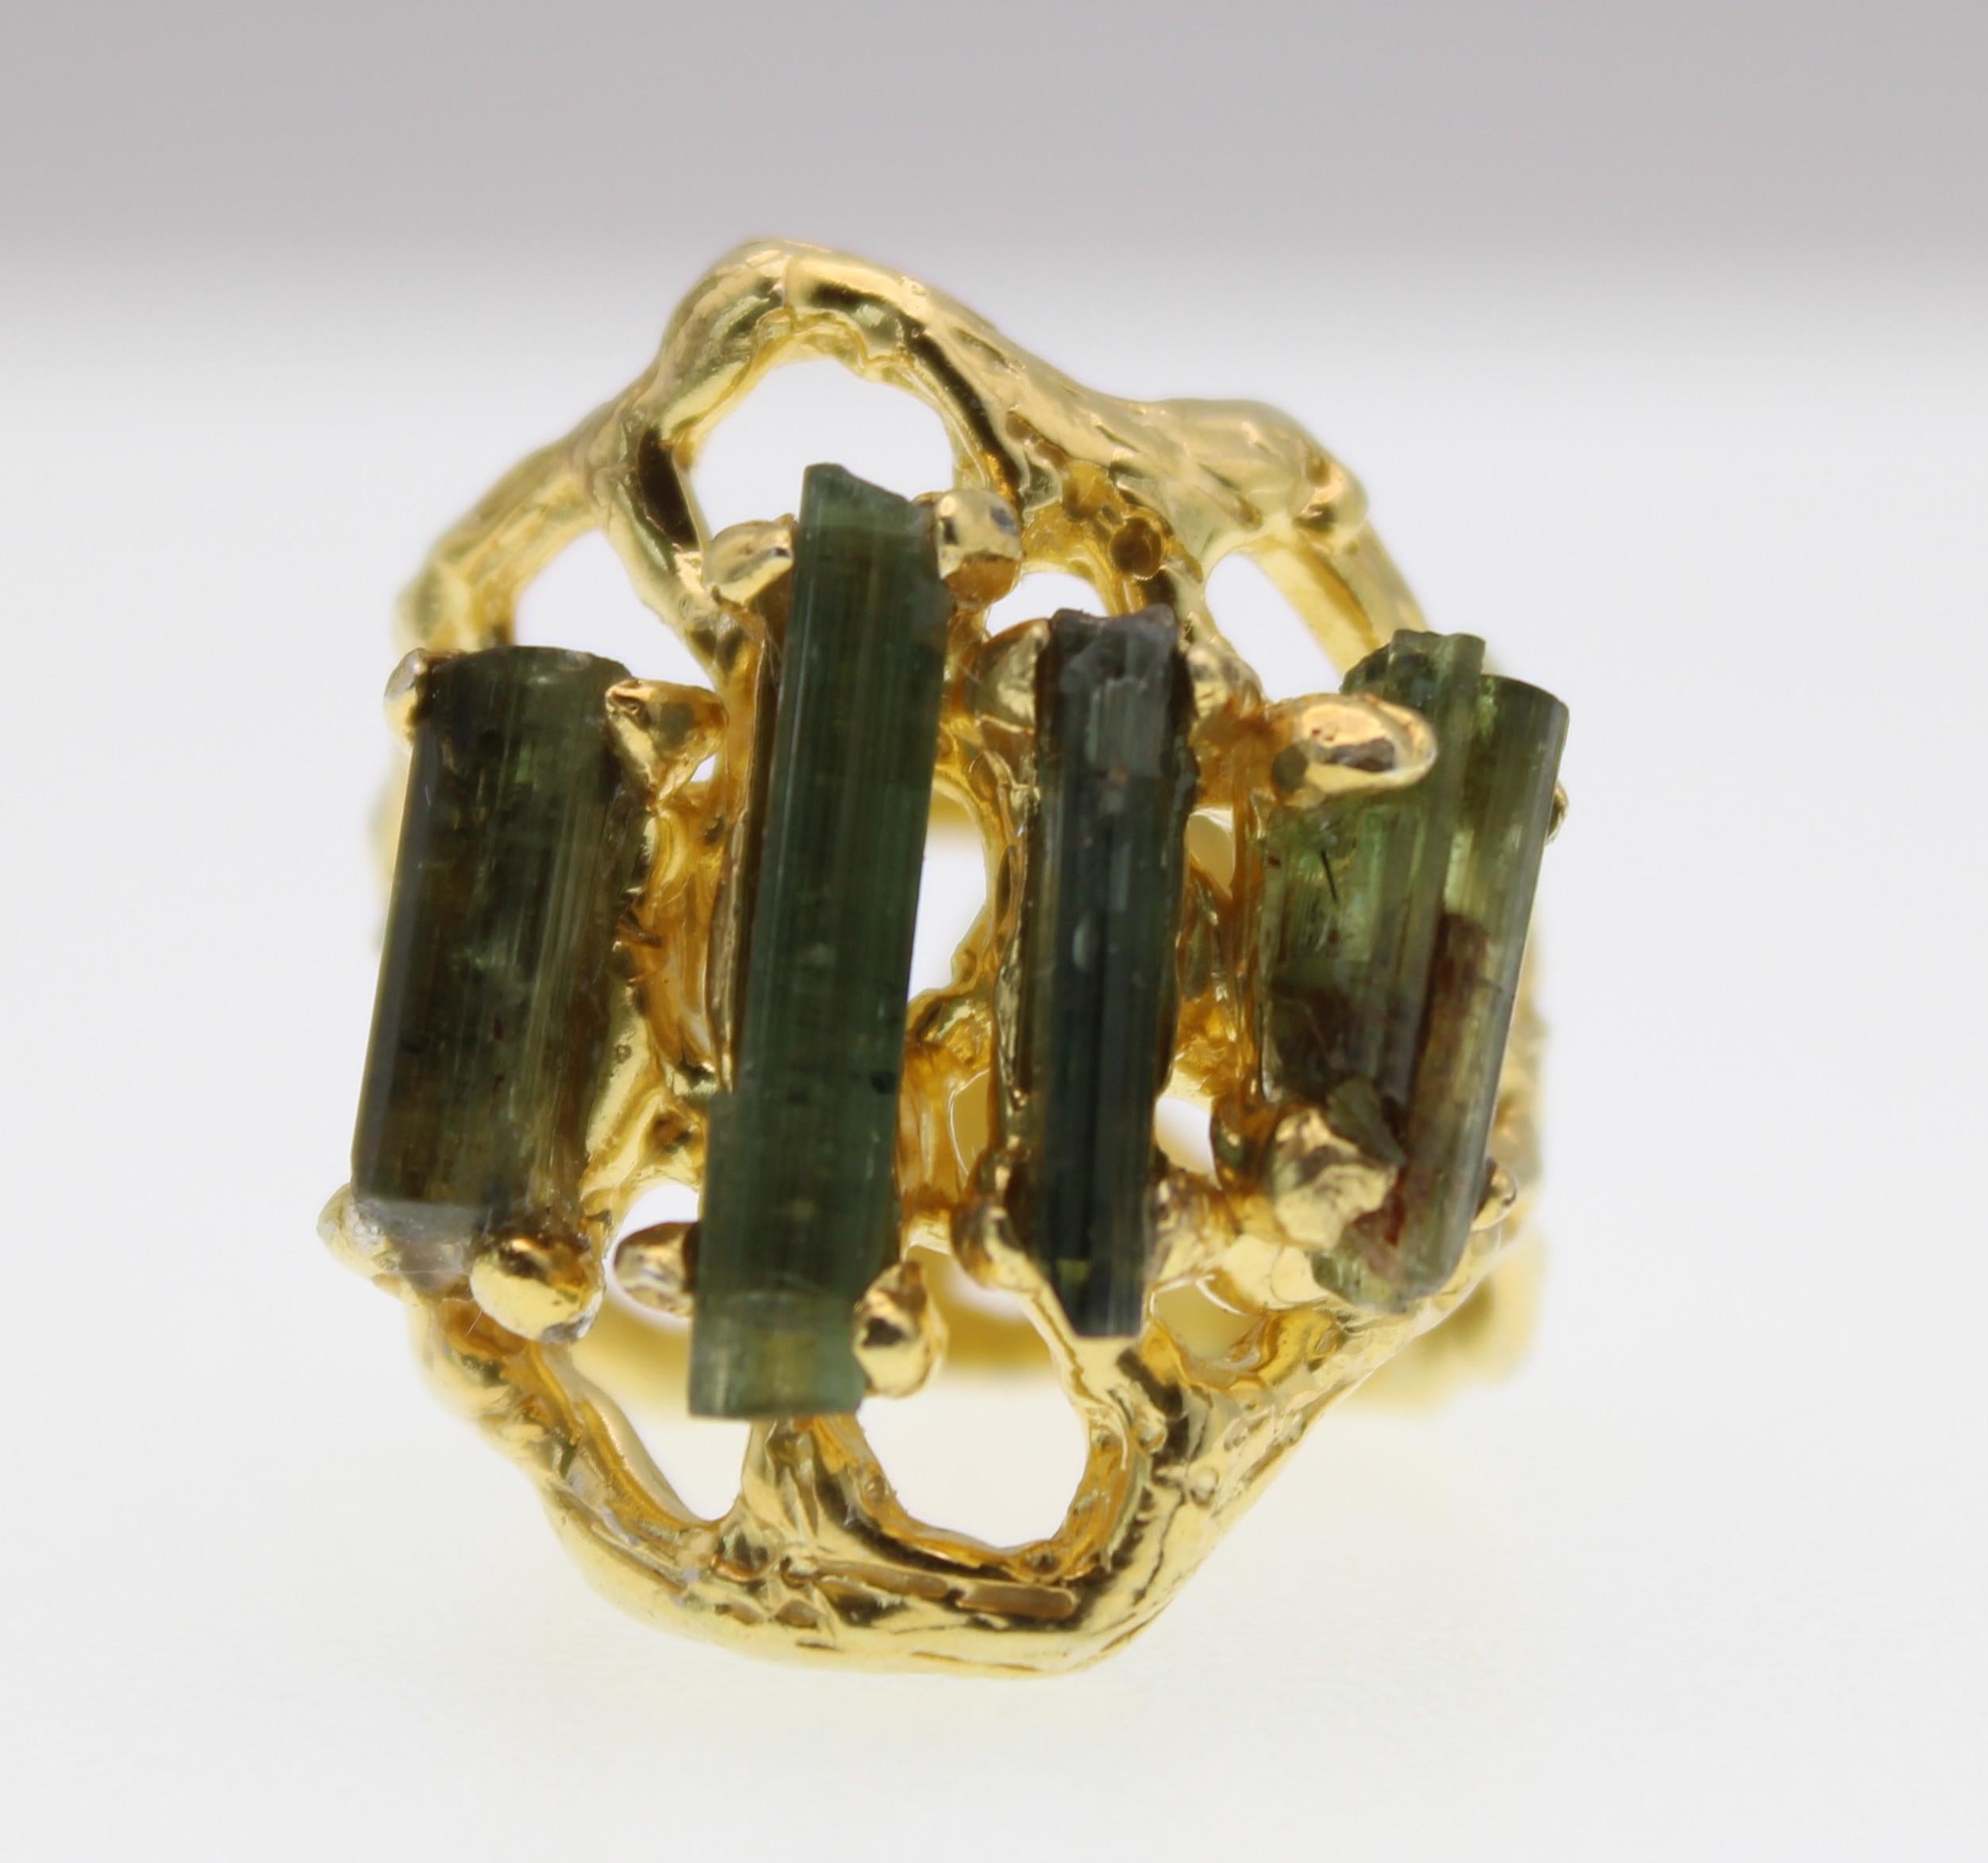 Stunning gold plated cocktail ring with 4 raw green tourmaline stones vertically set. This ring is a size 7.5.
Natural imperfections and striations in the tourmaline are present which gives this ring one-of-a-kind character.